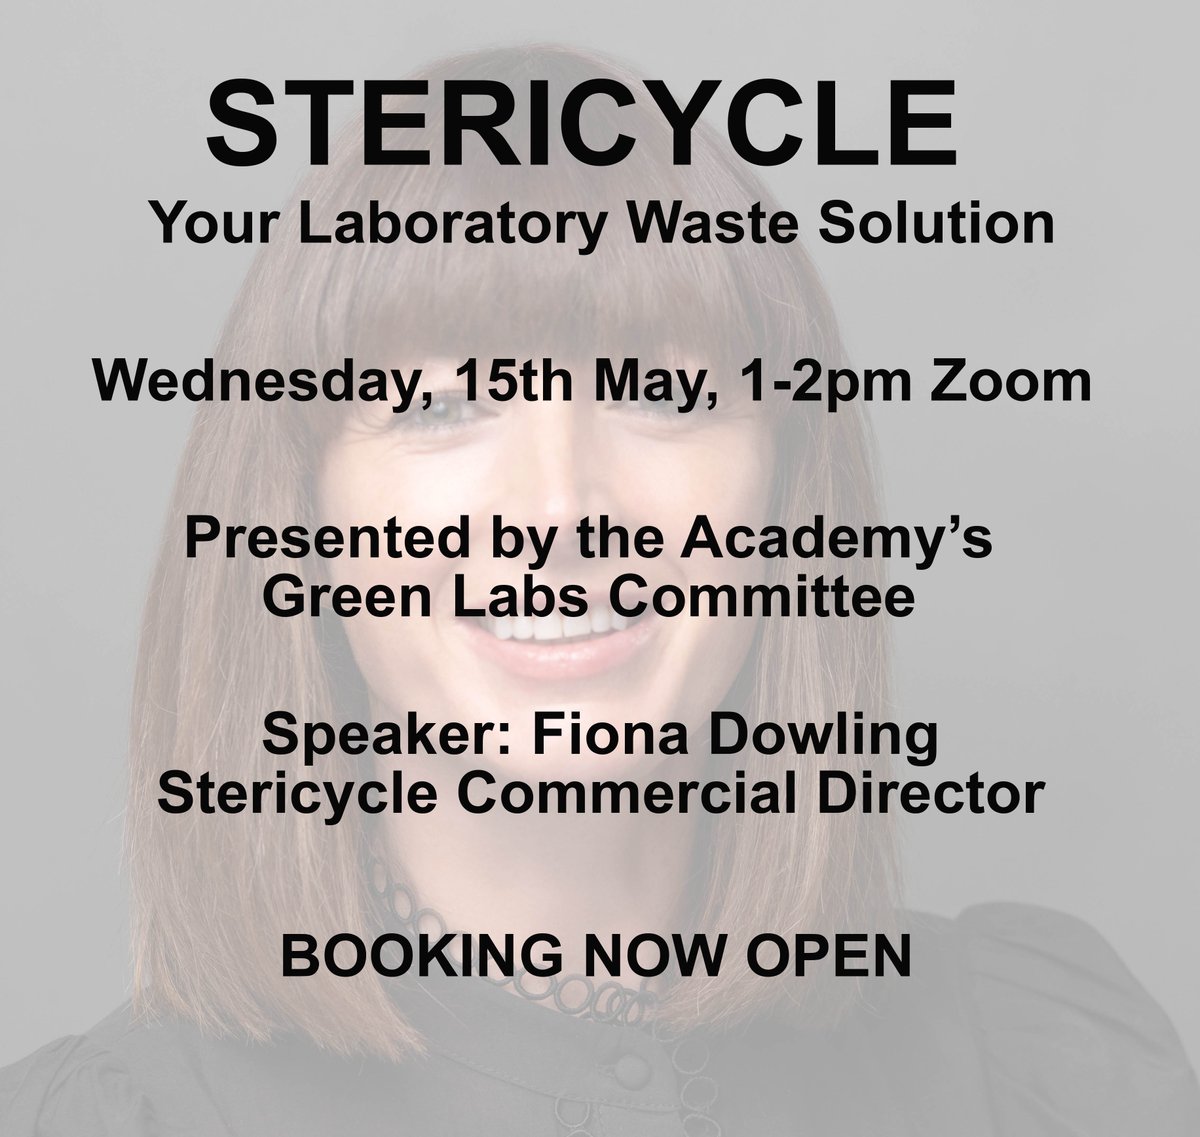 STERICYCLE: Your laboratory Waste Solution. Wednesday, 15th May, 1-1.45pm. Zoom
Booking and details: bit.ly/4bs02Jm
#medicalscientists @ACSLM1 @MedLabAssoc @TUDub_Biology @ATU_GalwayCity @BioSci_MTU @UCCBiomedSoc @WeHSCPs